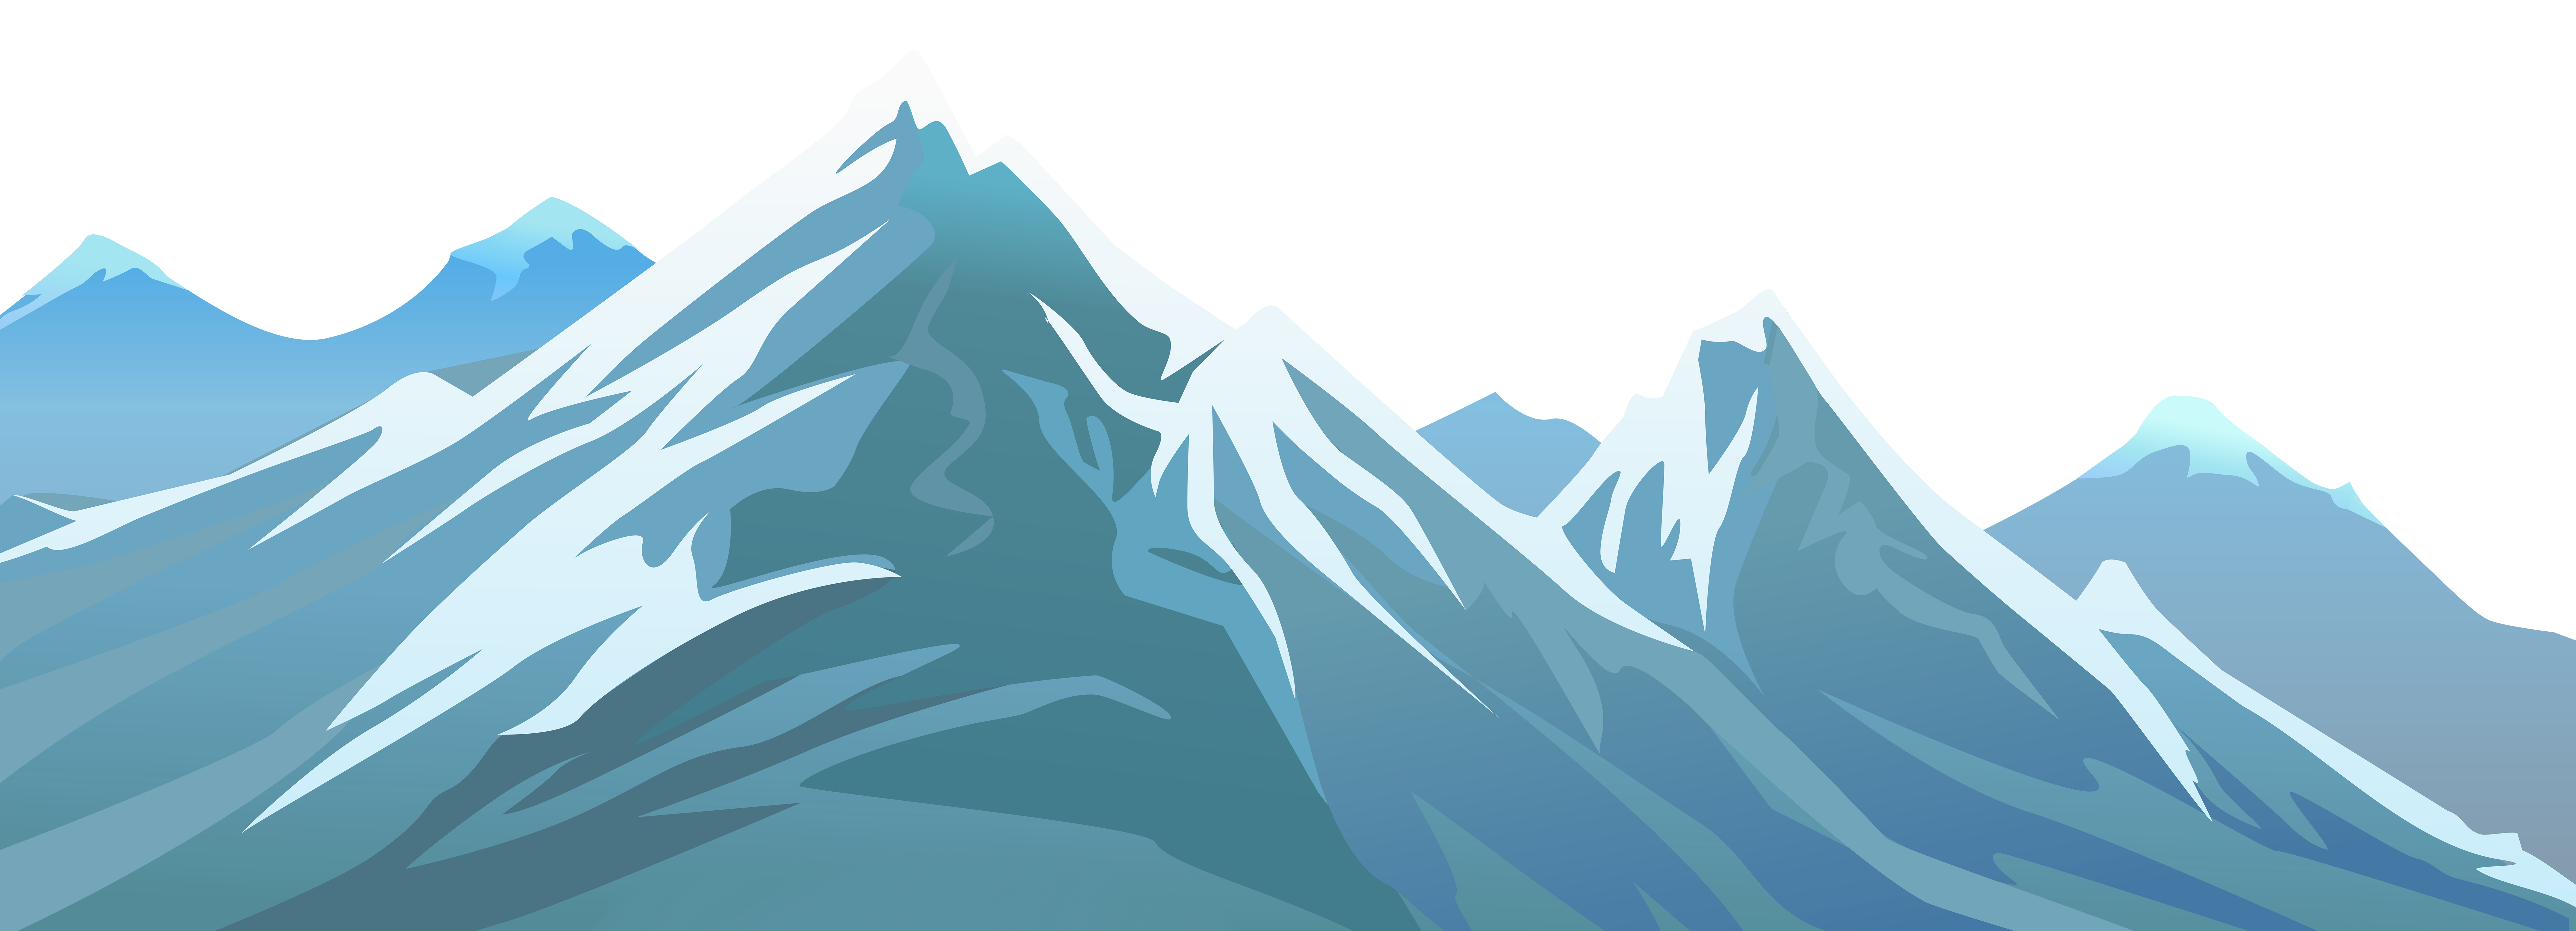 Clipart road backdrop. Snowy mountain transparent png